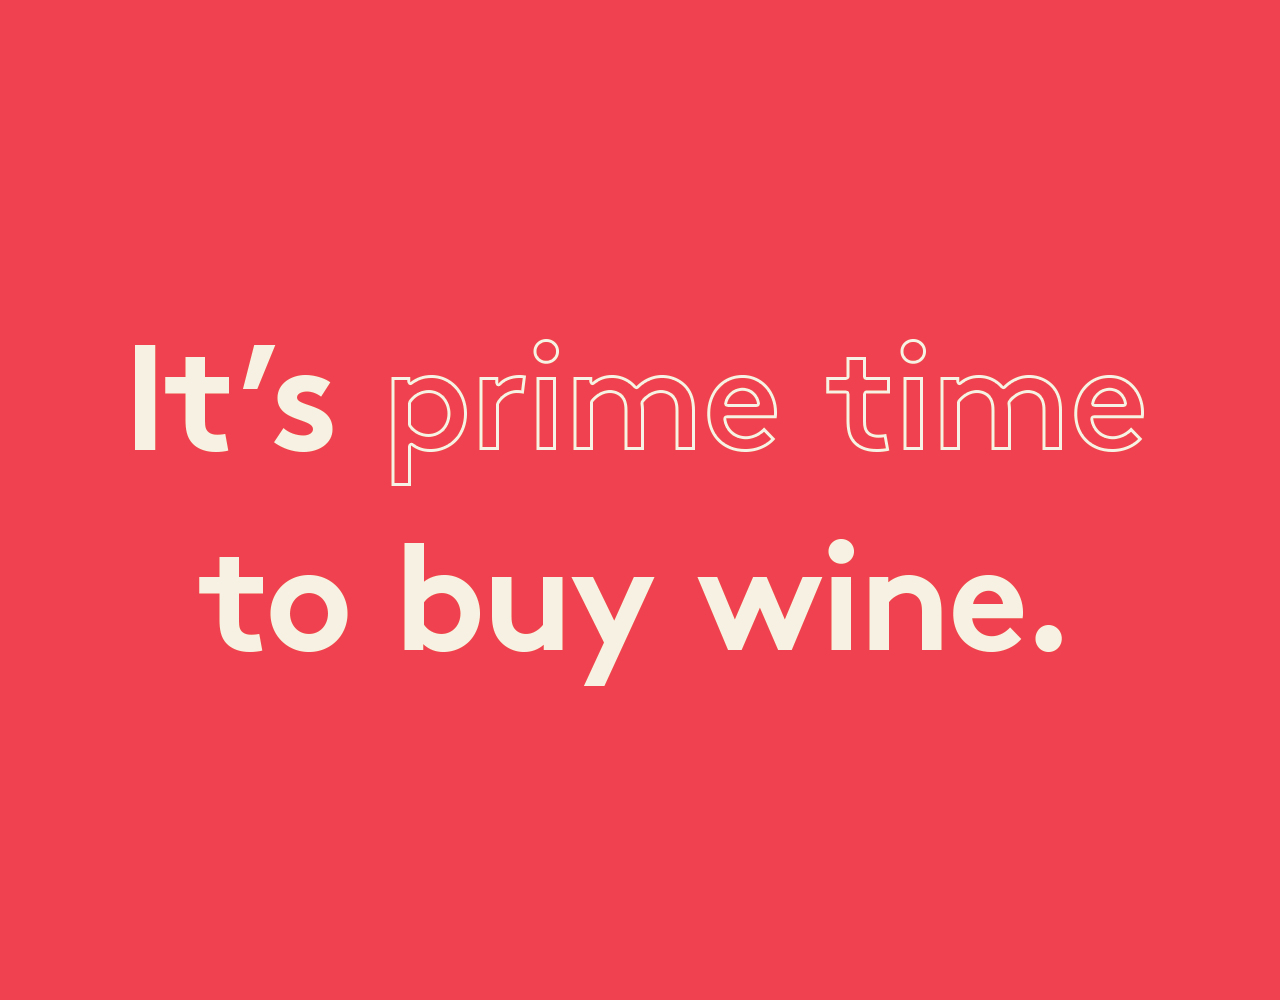 It's prime time to buy wine.